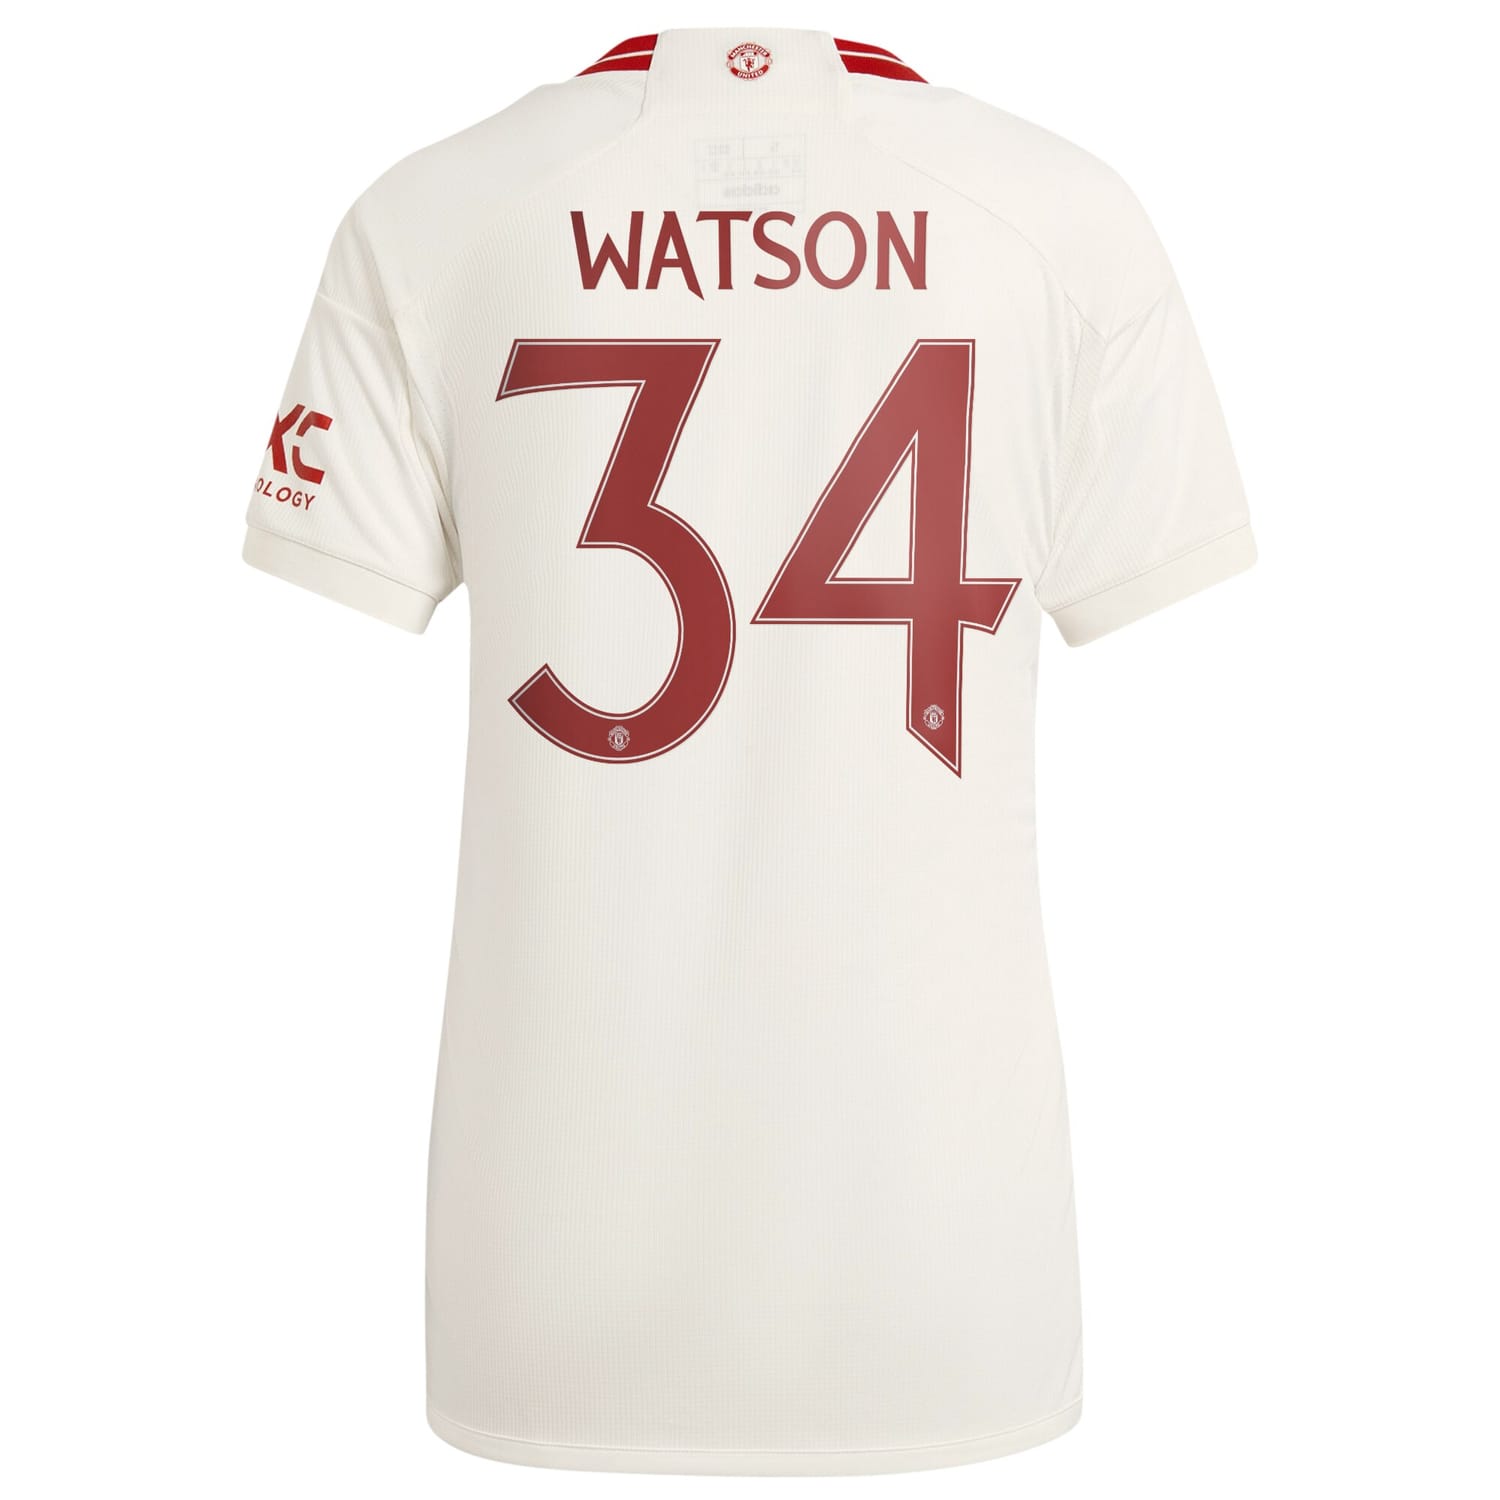 Premier League Manchester United Third Cup Jersey Shirt 2023-24 player Emma Watson printing for Women